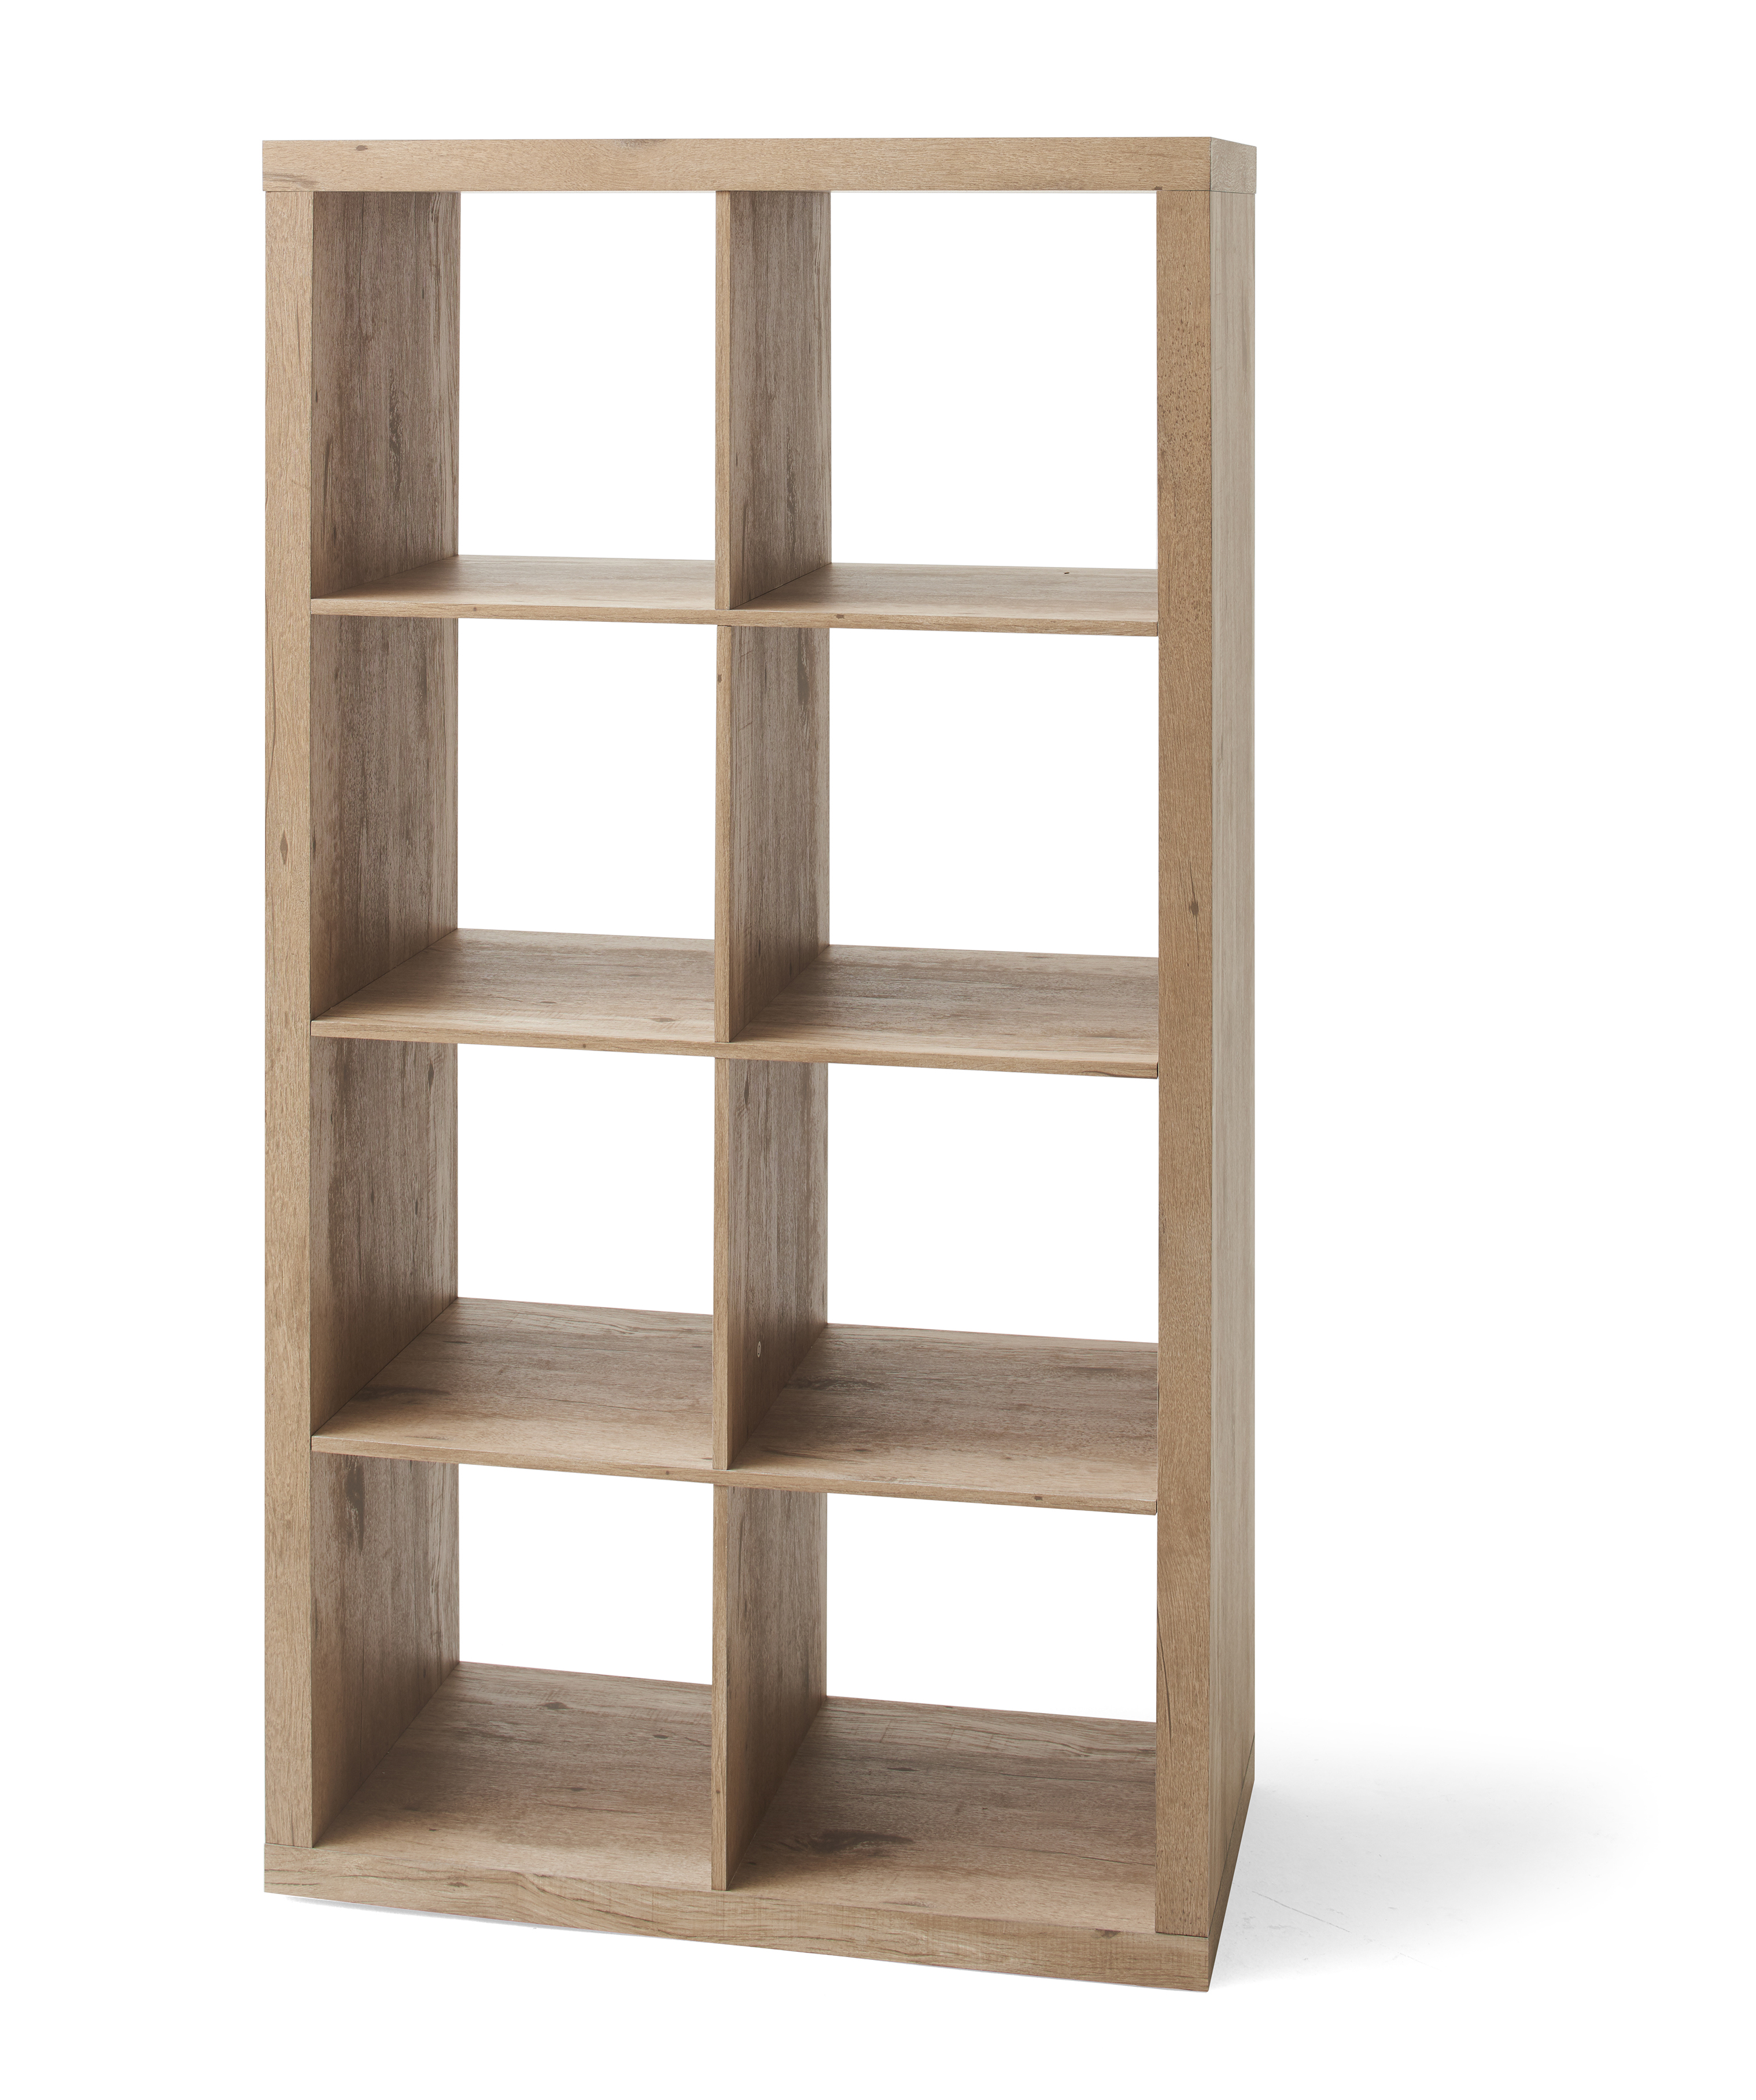 Better Homes & Gardens 8-Cube Storage Organizer, Natural - image 1 of 8